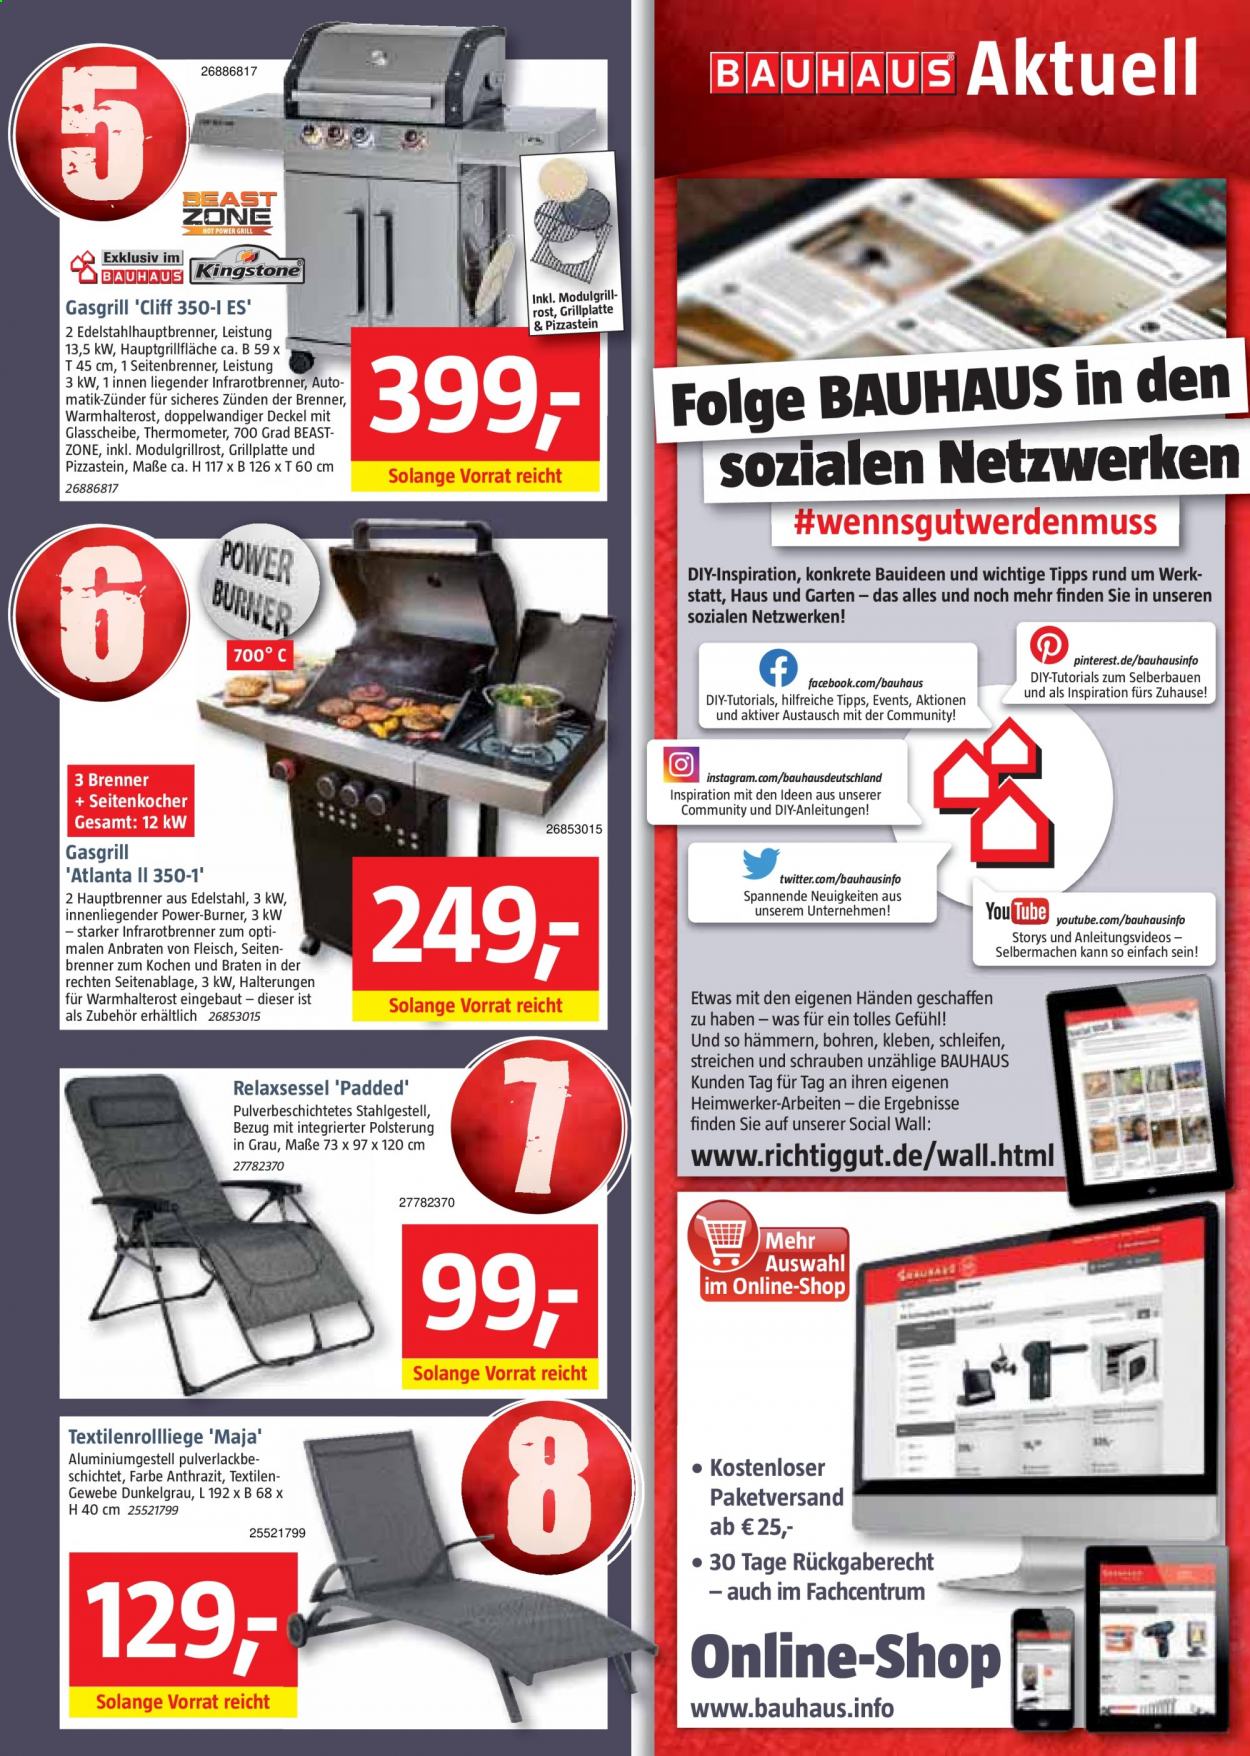 thumbnail - Prospekte Bauhaus - 3.07.2021 - 31.07.2021 - Produkte in Aktion - Fieberthermometer, Thermometer, Relaxsessel, Grill, Gasgrill. Seite 3.